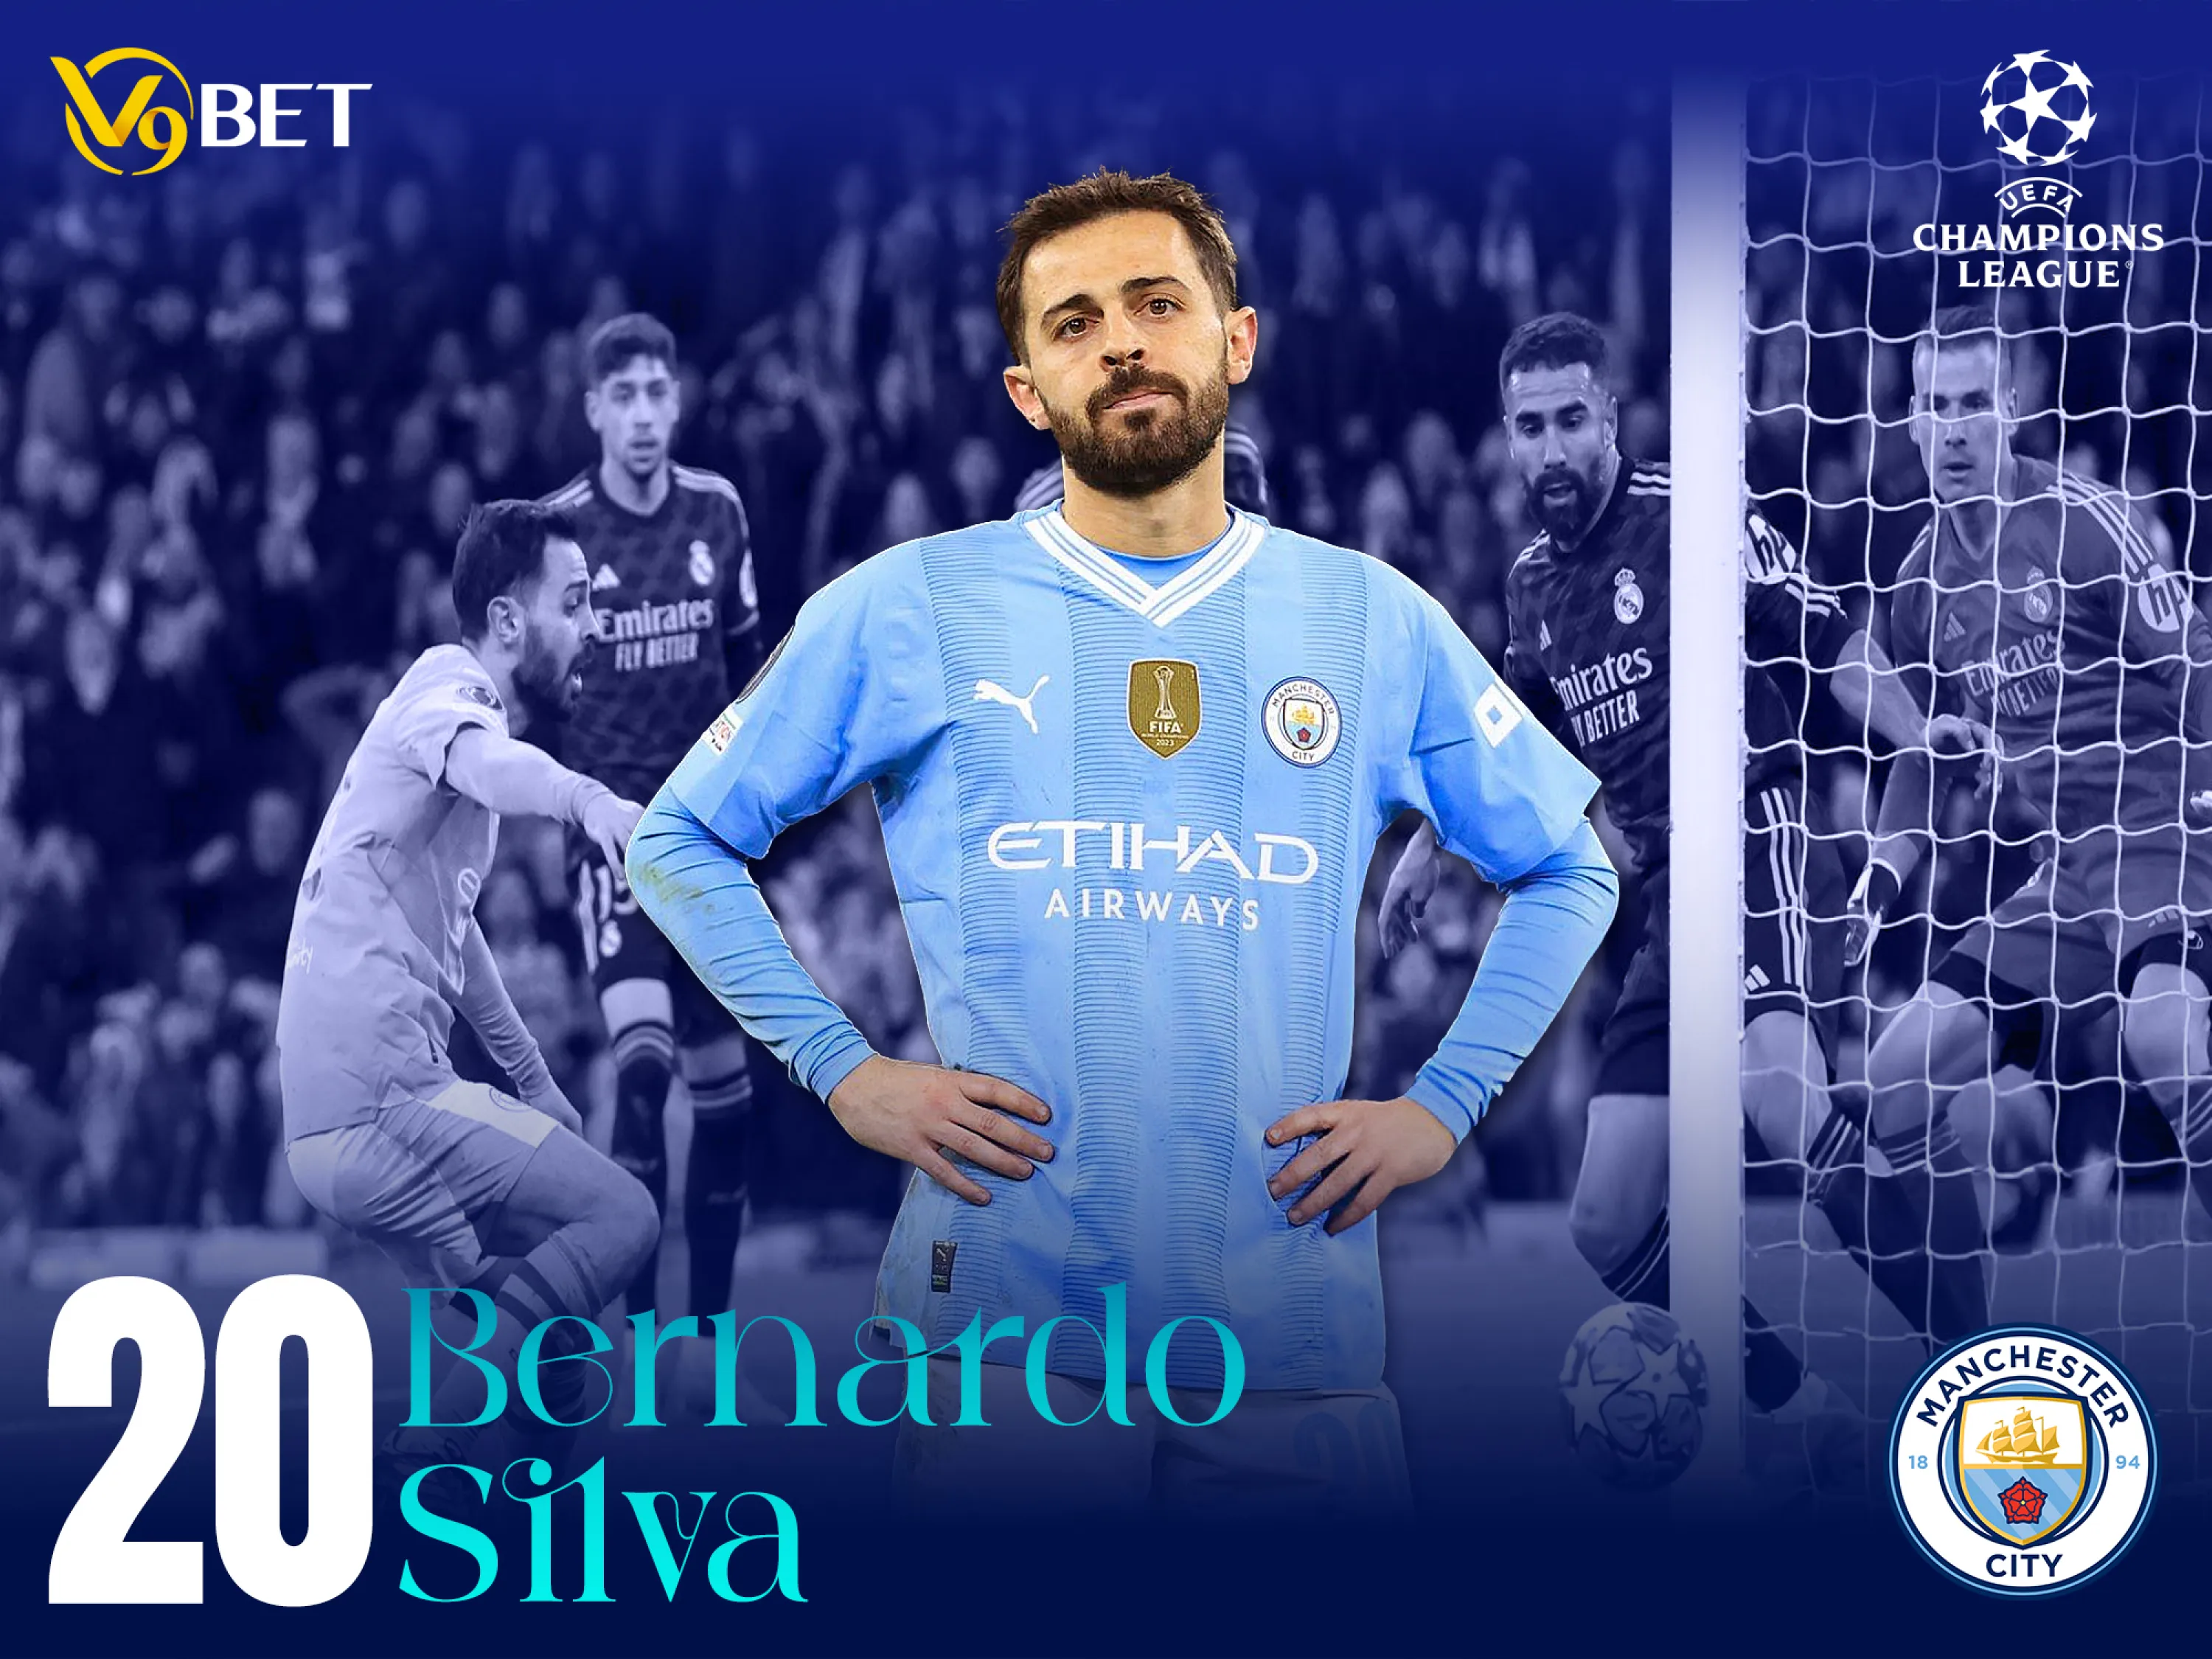 Bernardo Silva confused about how to play against Real